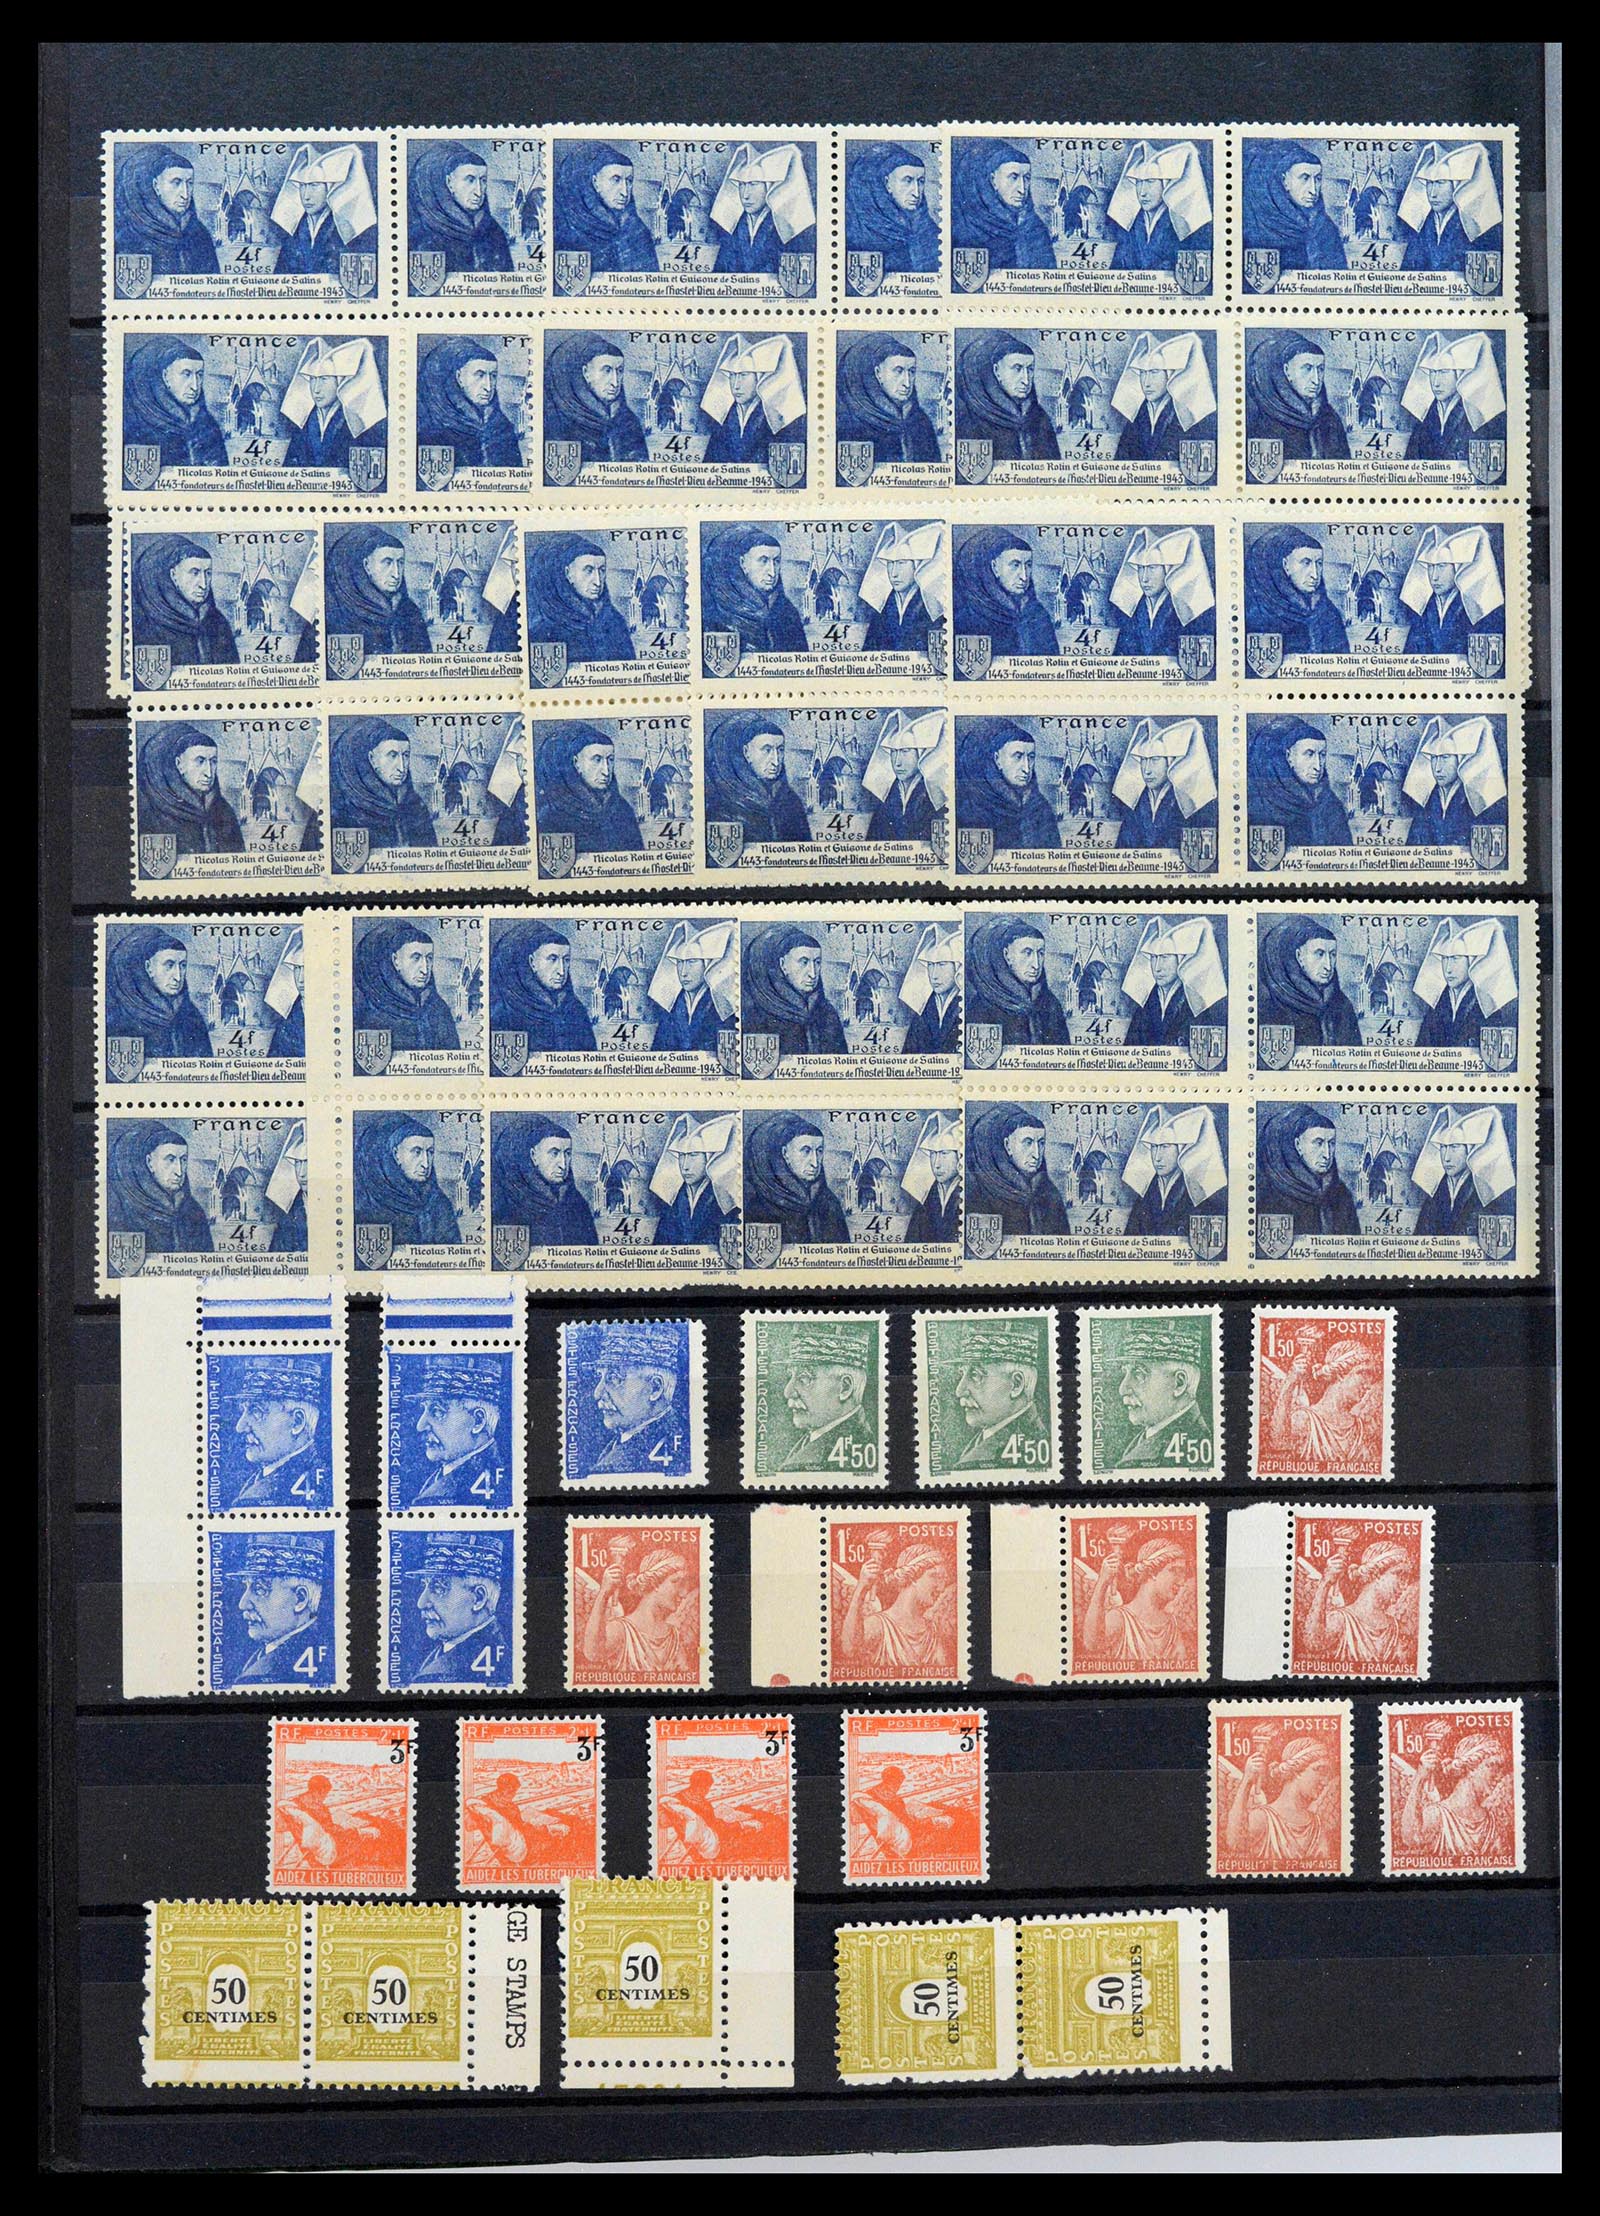 39423 0008 - Stamp collection 39423 France varieties 1862-1985.